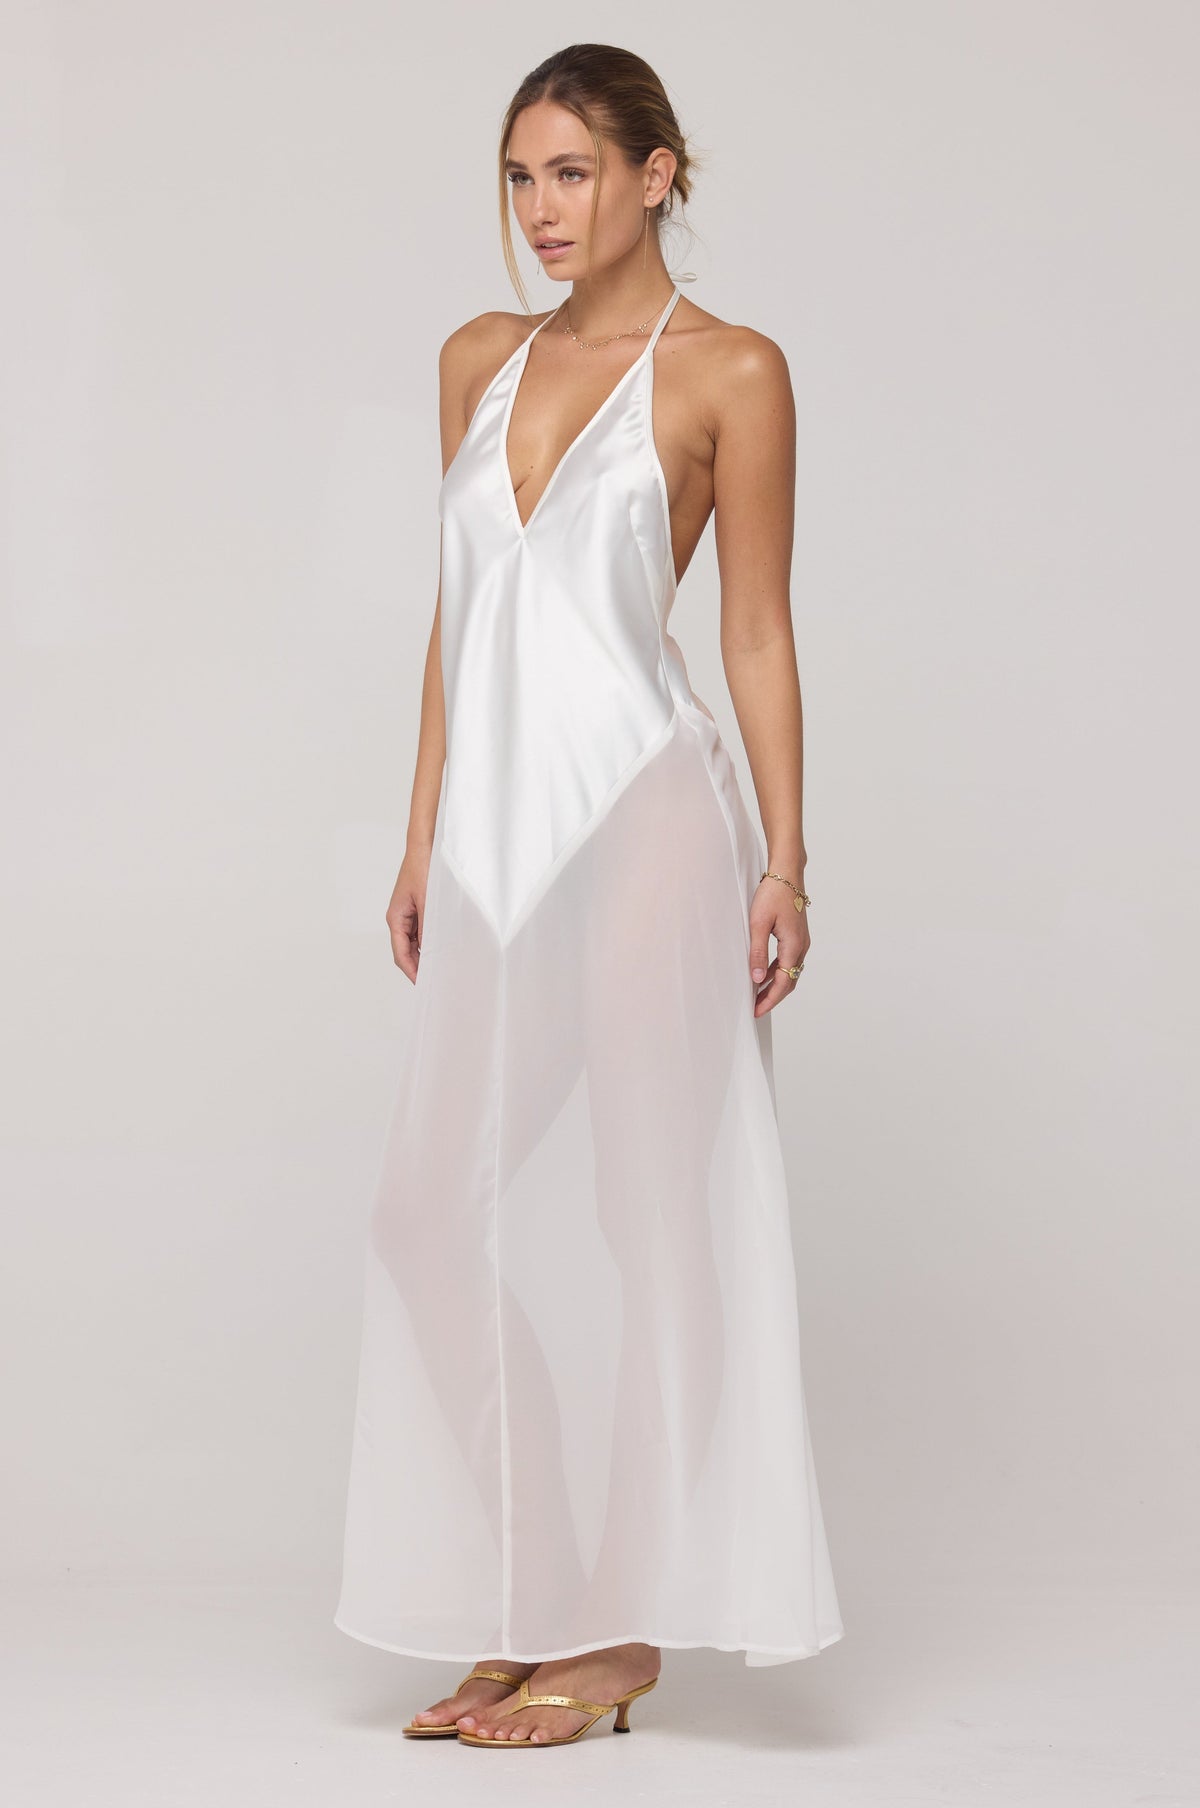 This is an image of Goddess Maxi Dress in White - RESA featuring a model wearing the dress